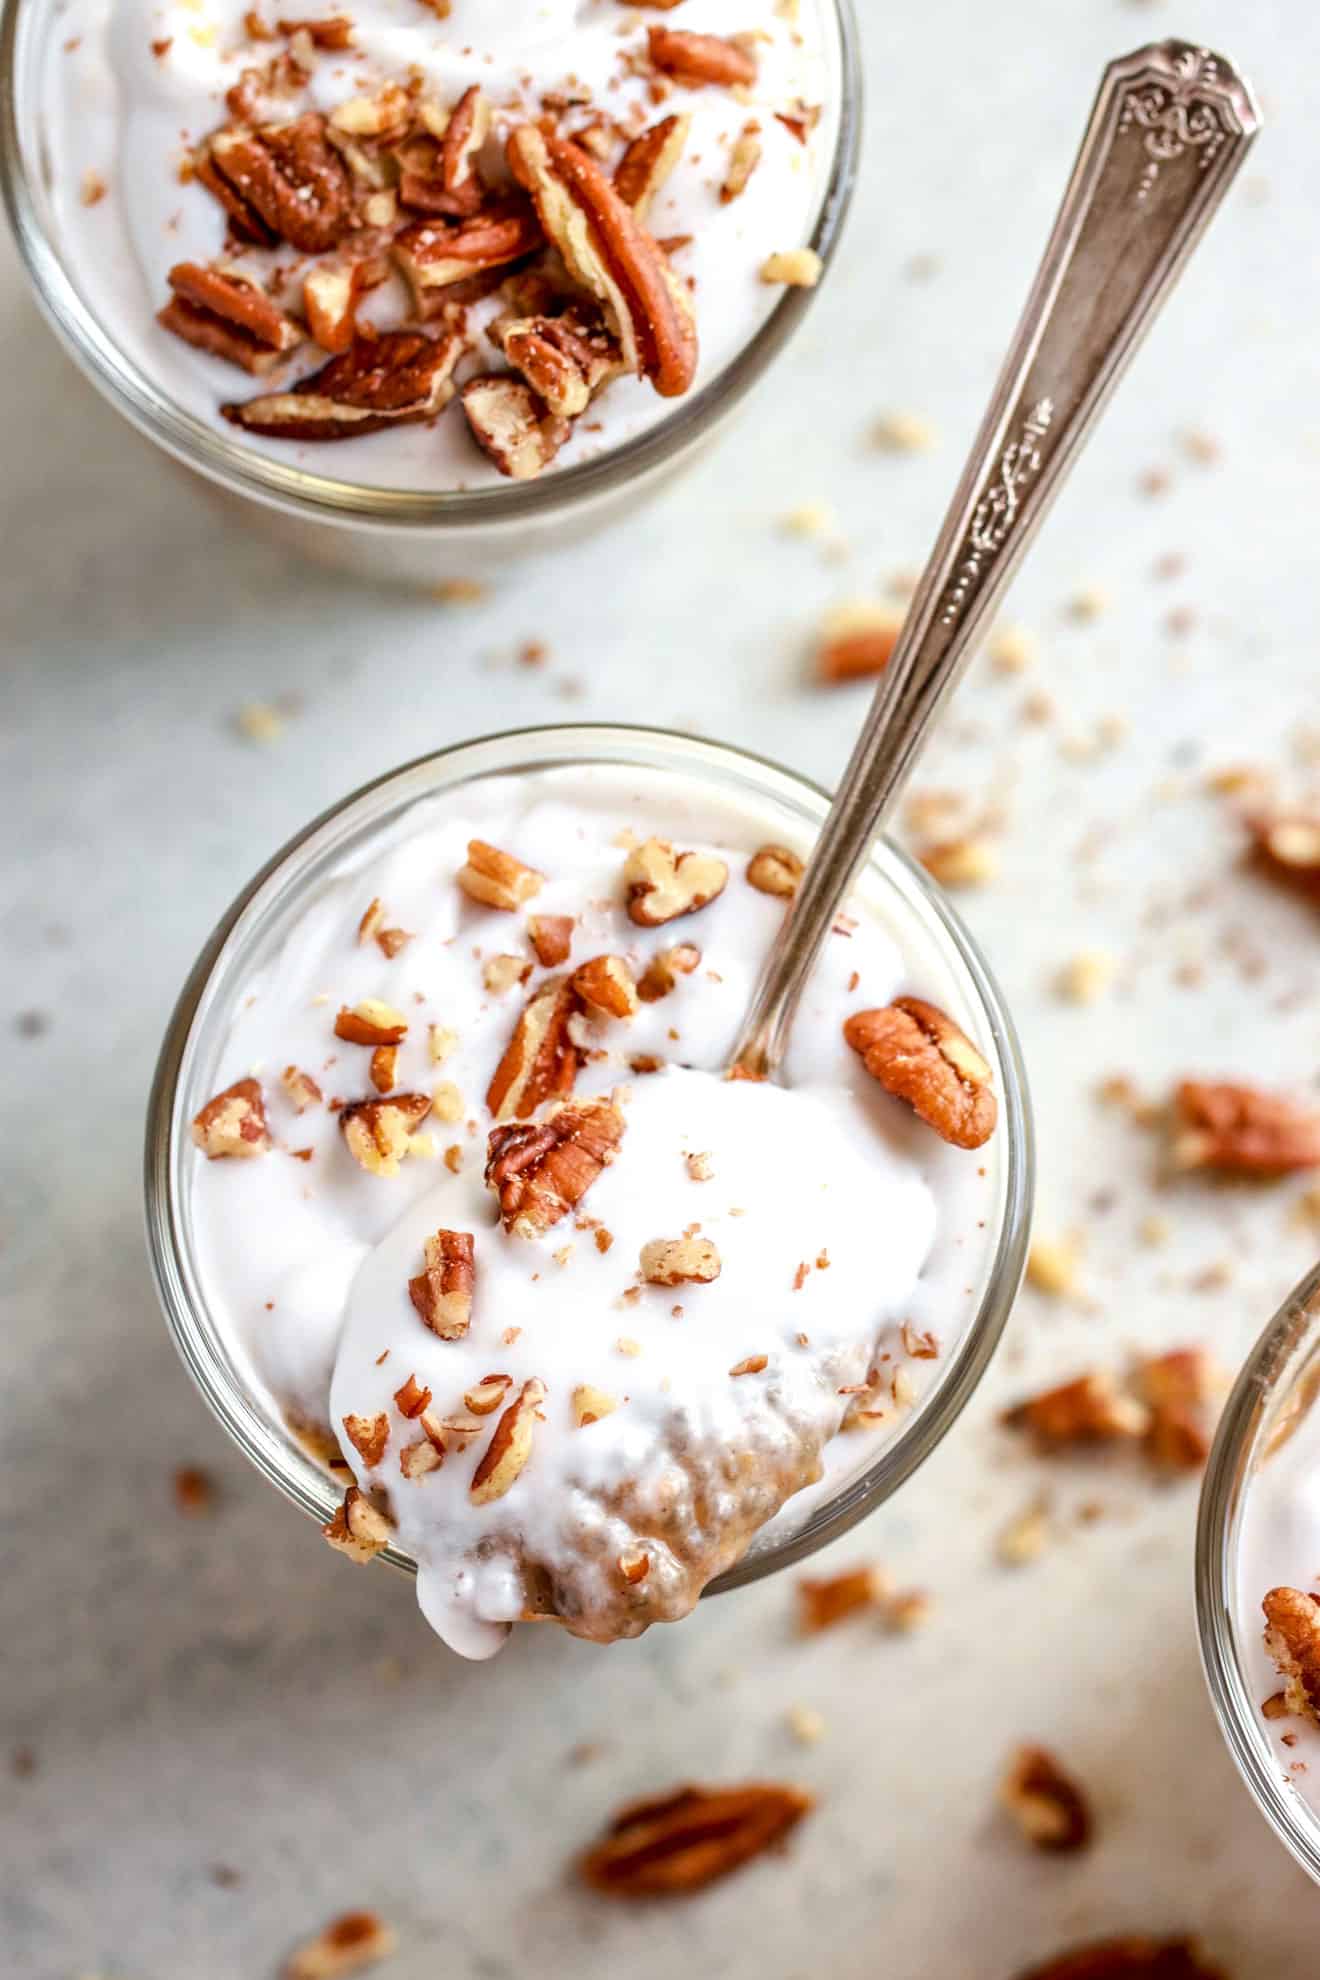 Overhead image of vegan pumpkin chia pudding with a spoon scooping some, topped with coconut cream and chopped pecans